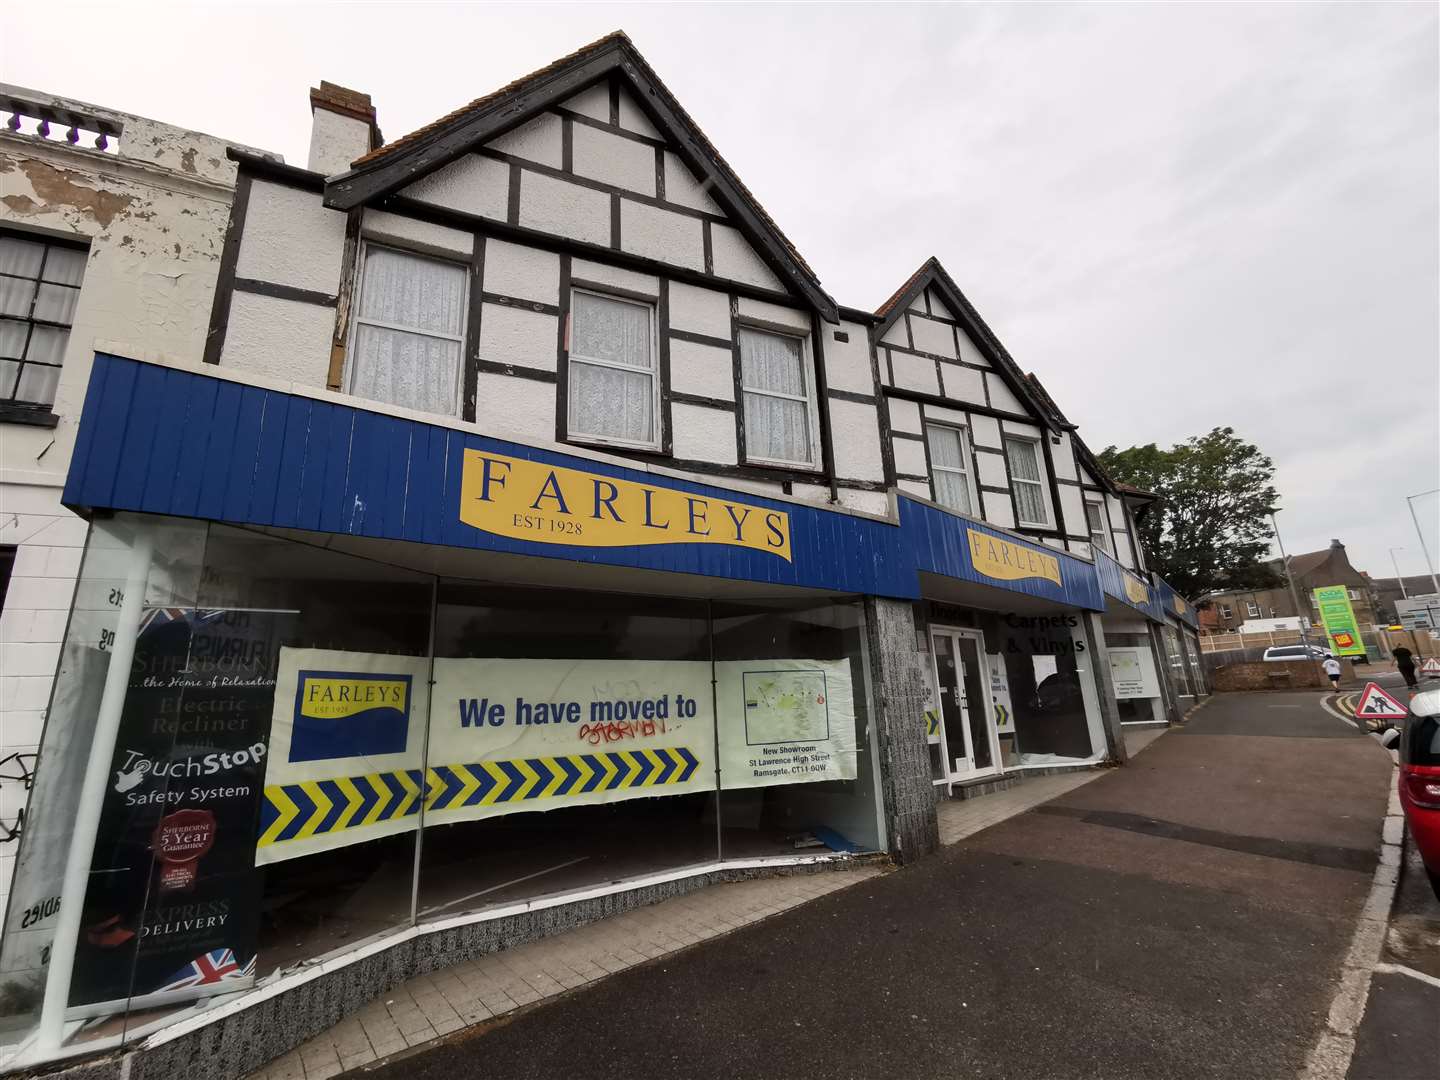 The former Farleys Furniture Store is on the market